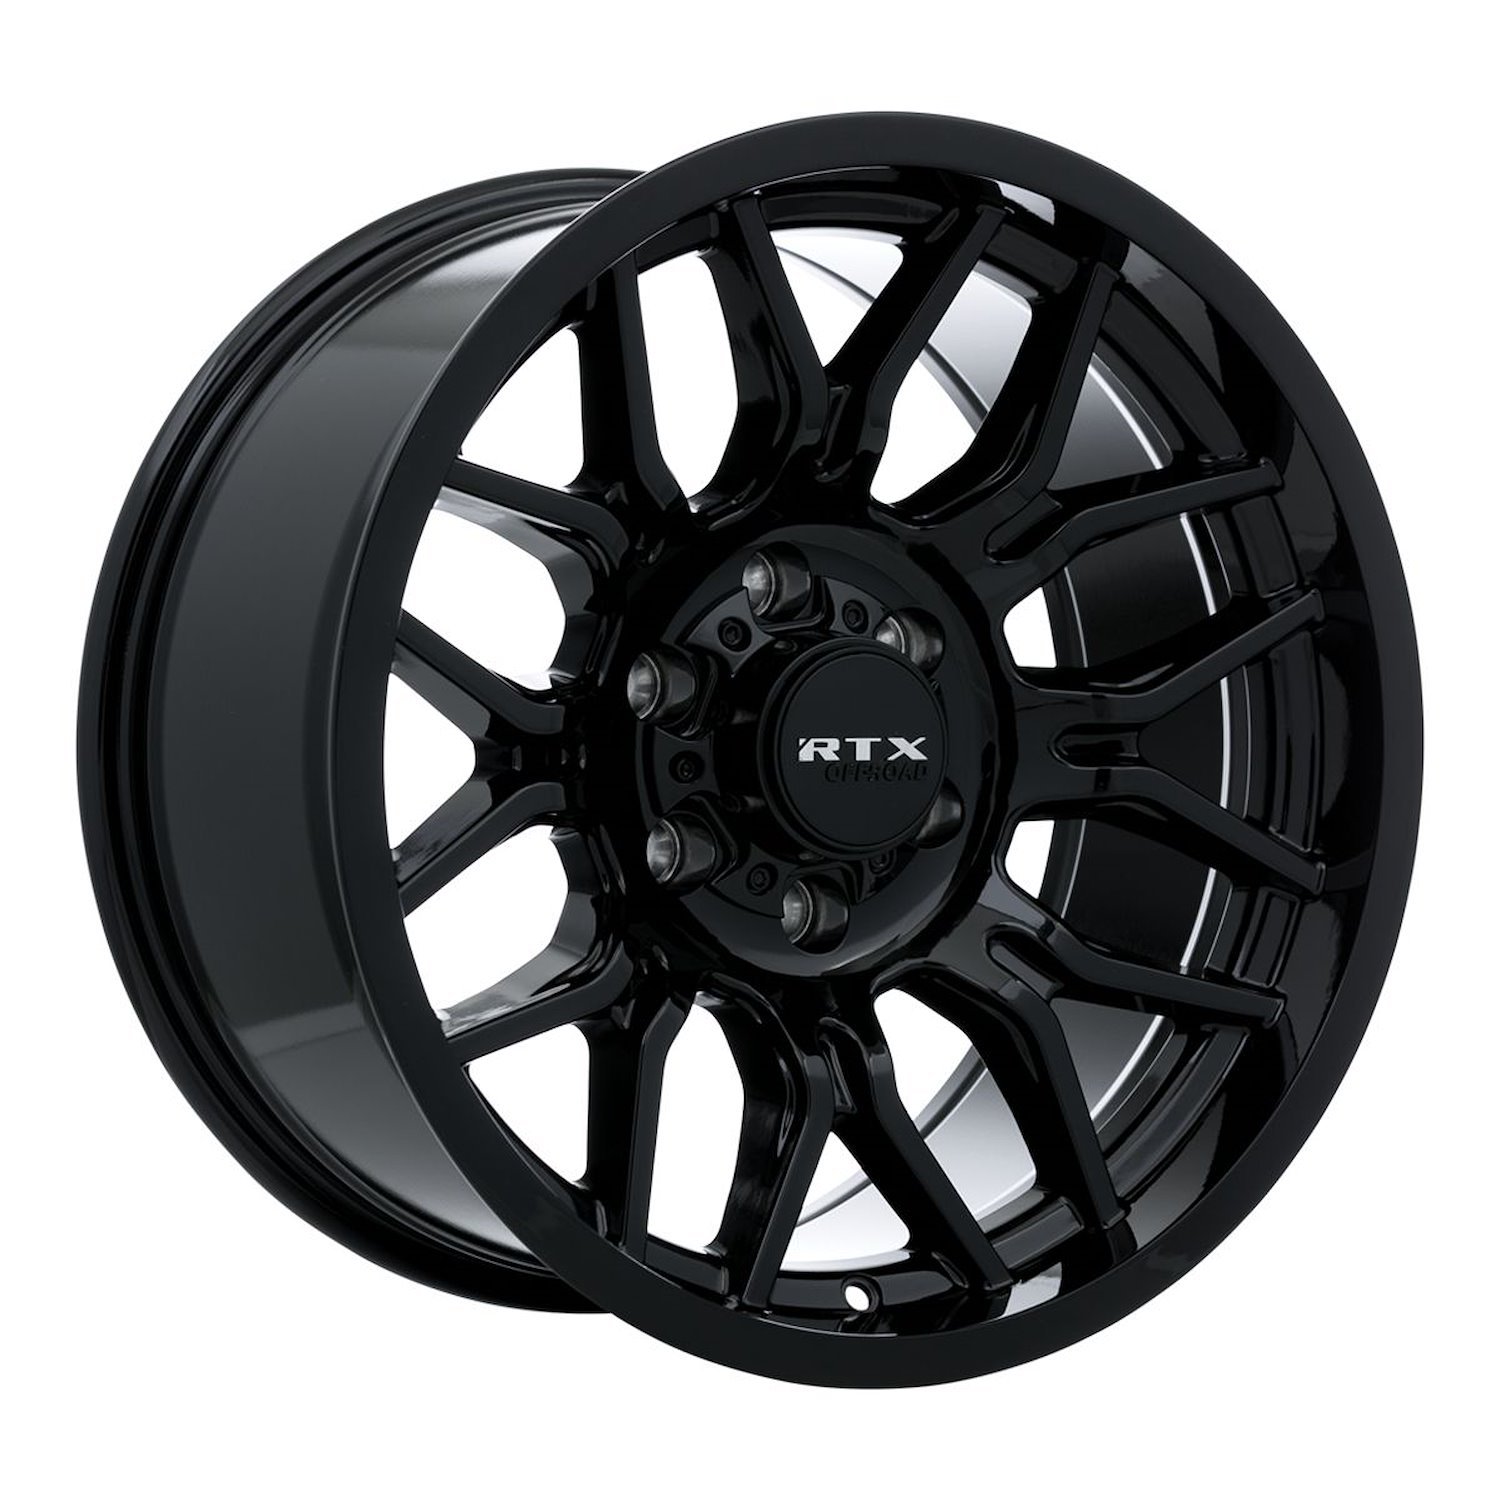 163759 Off-Road Series Claw Wheel [Size: 20" x 9"] Gloss Black Finish